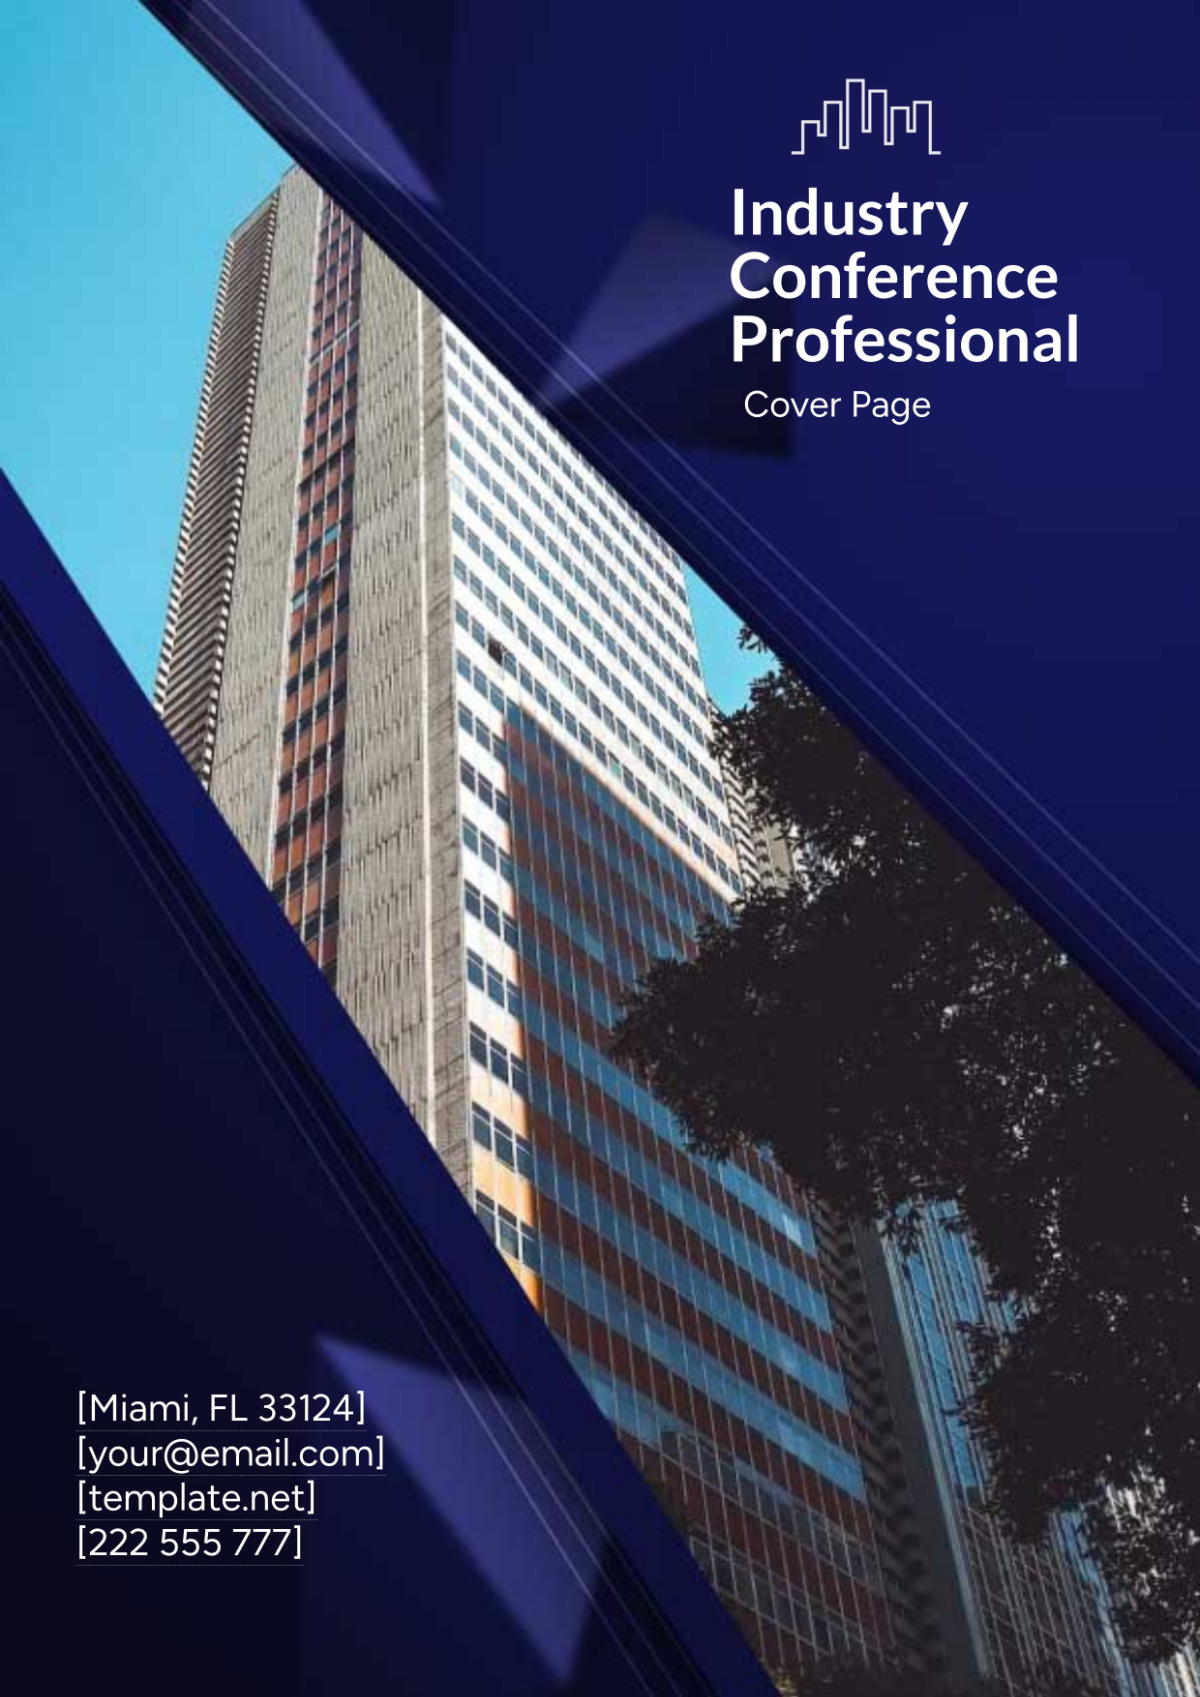 Industry Conference Professional Cover Page